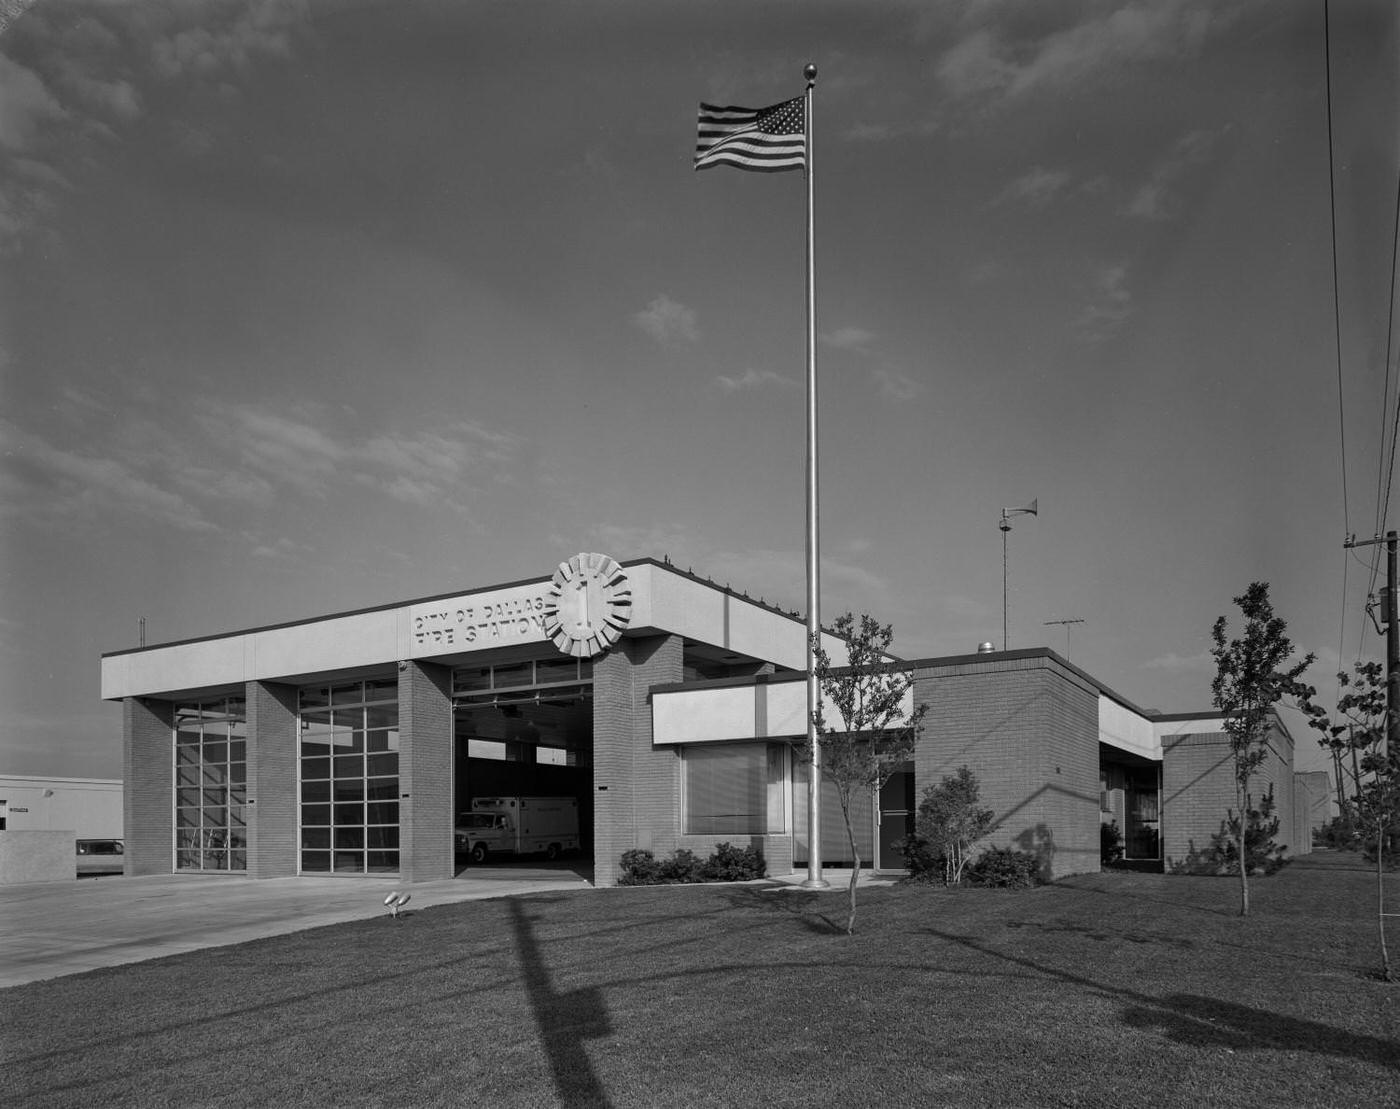 Exterior of a Dallas fire station, 1960s